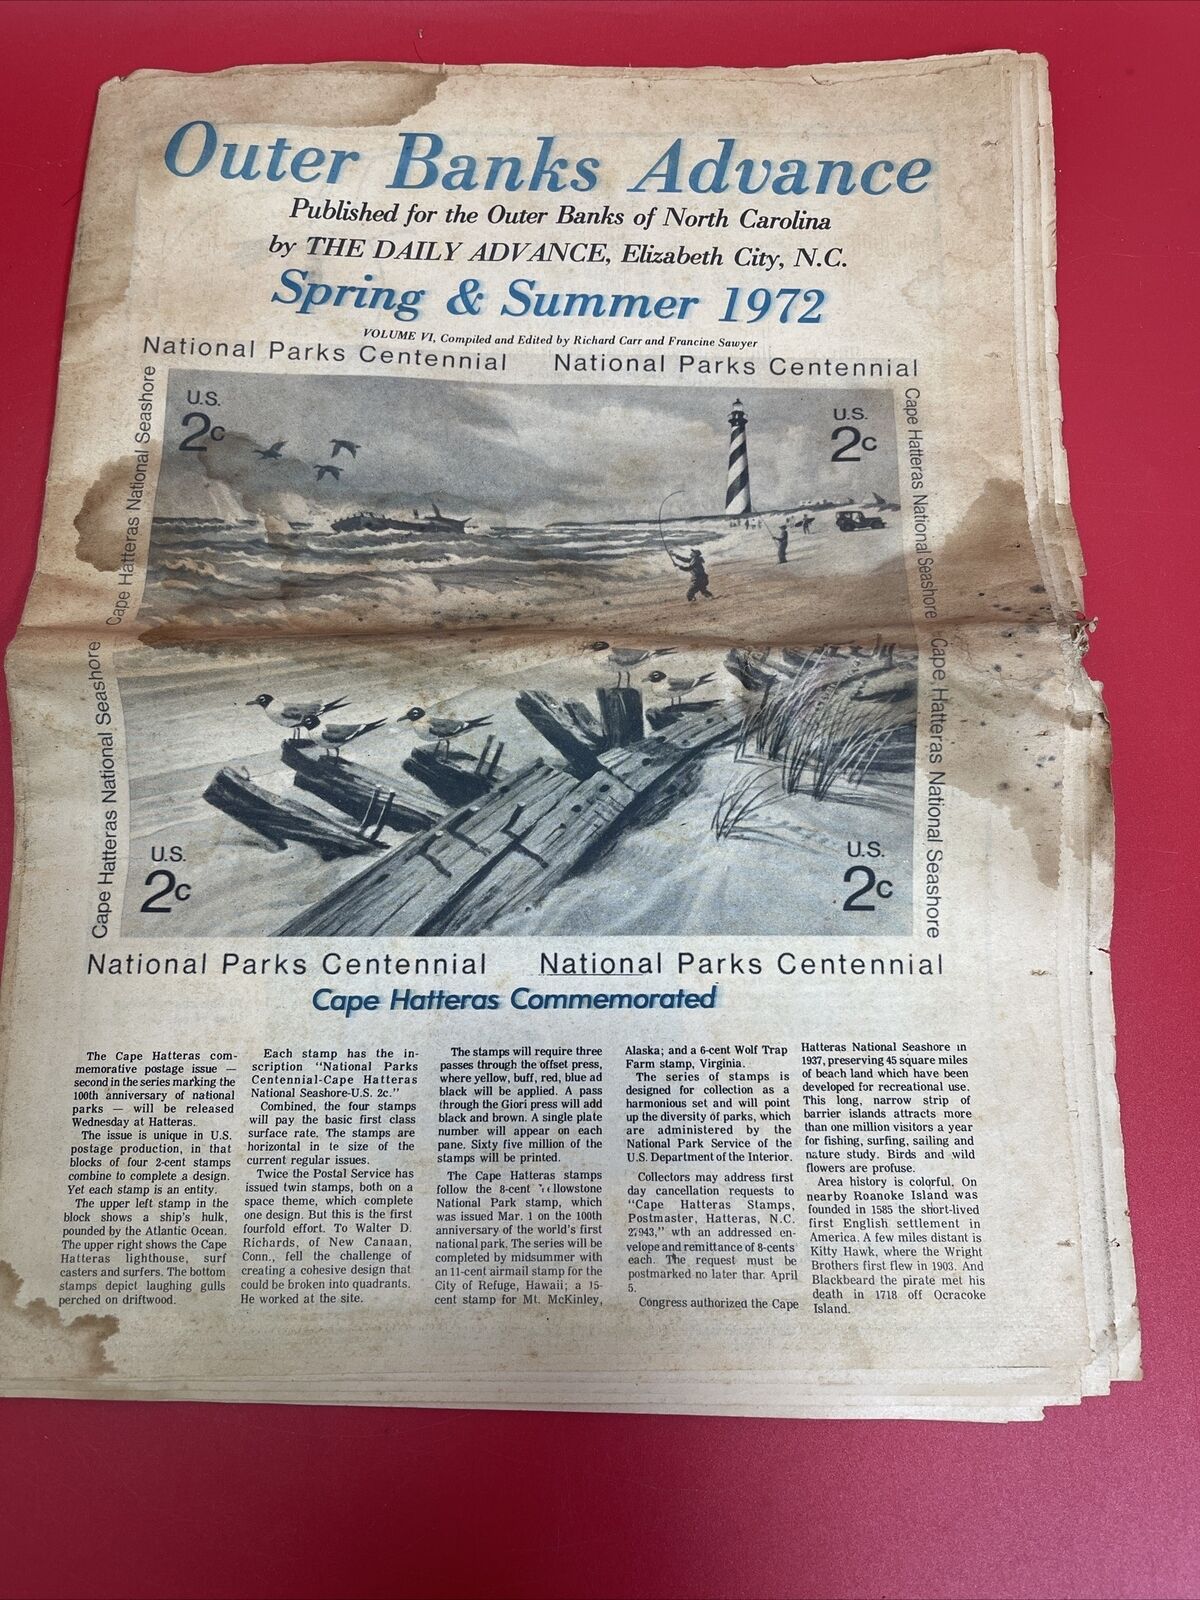 The Outer Banks Advance,Starring & Summer 1972